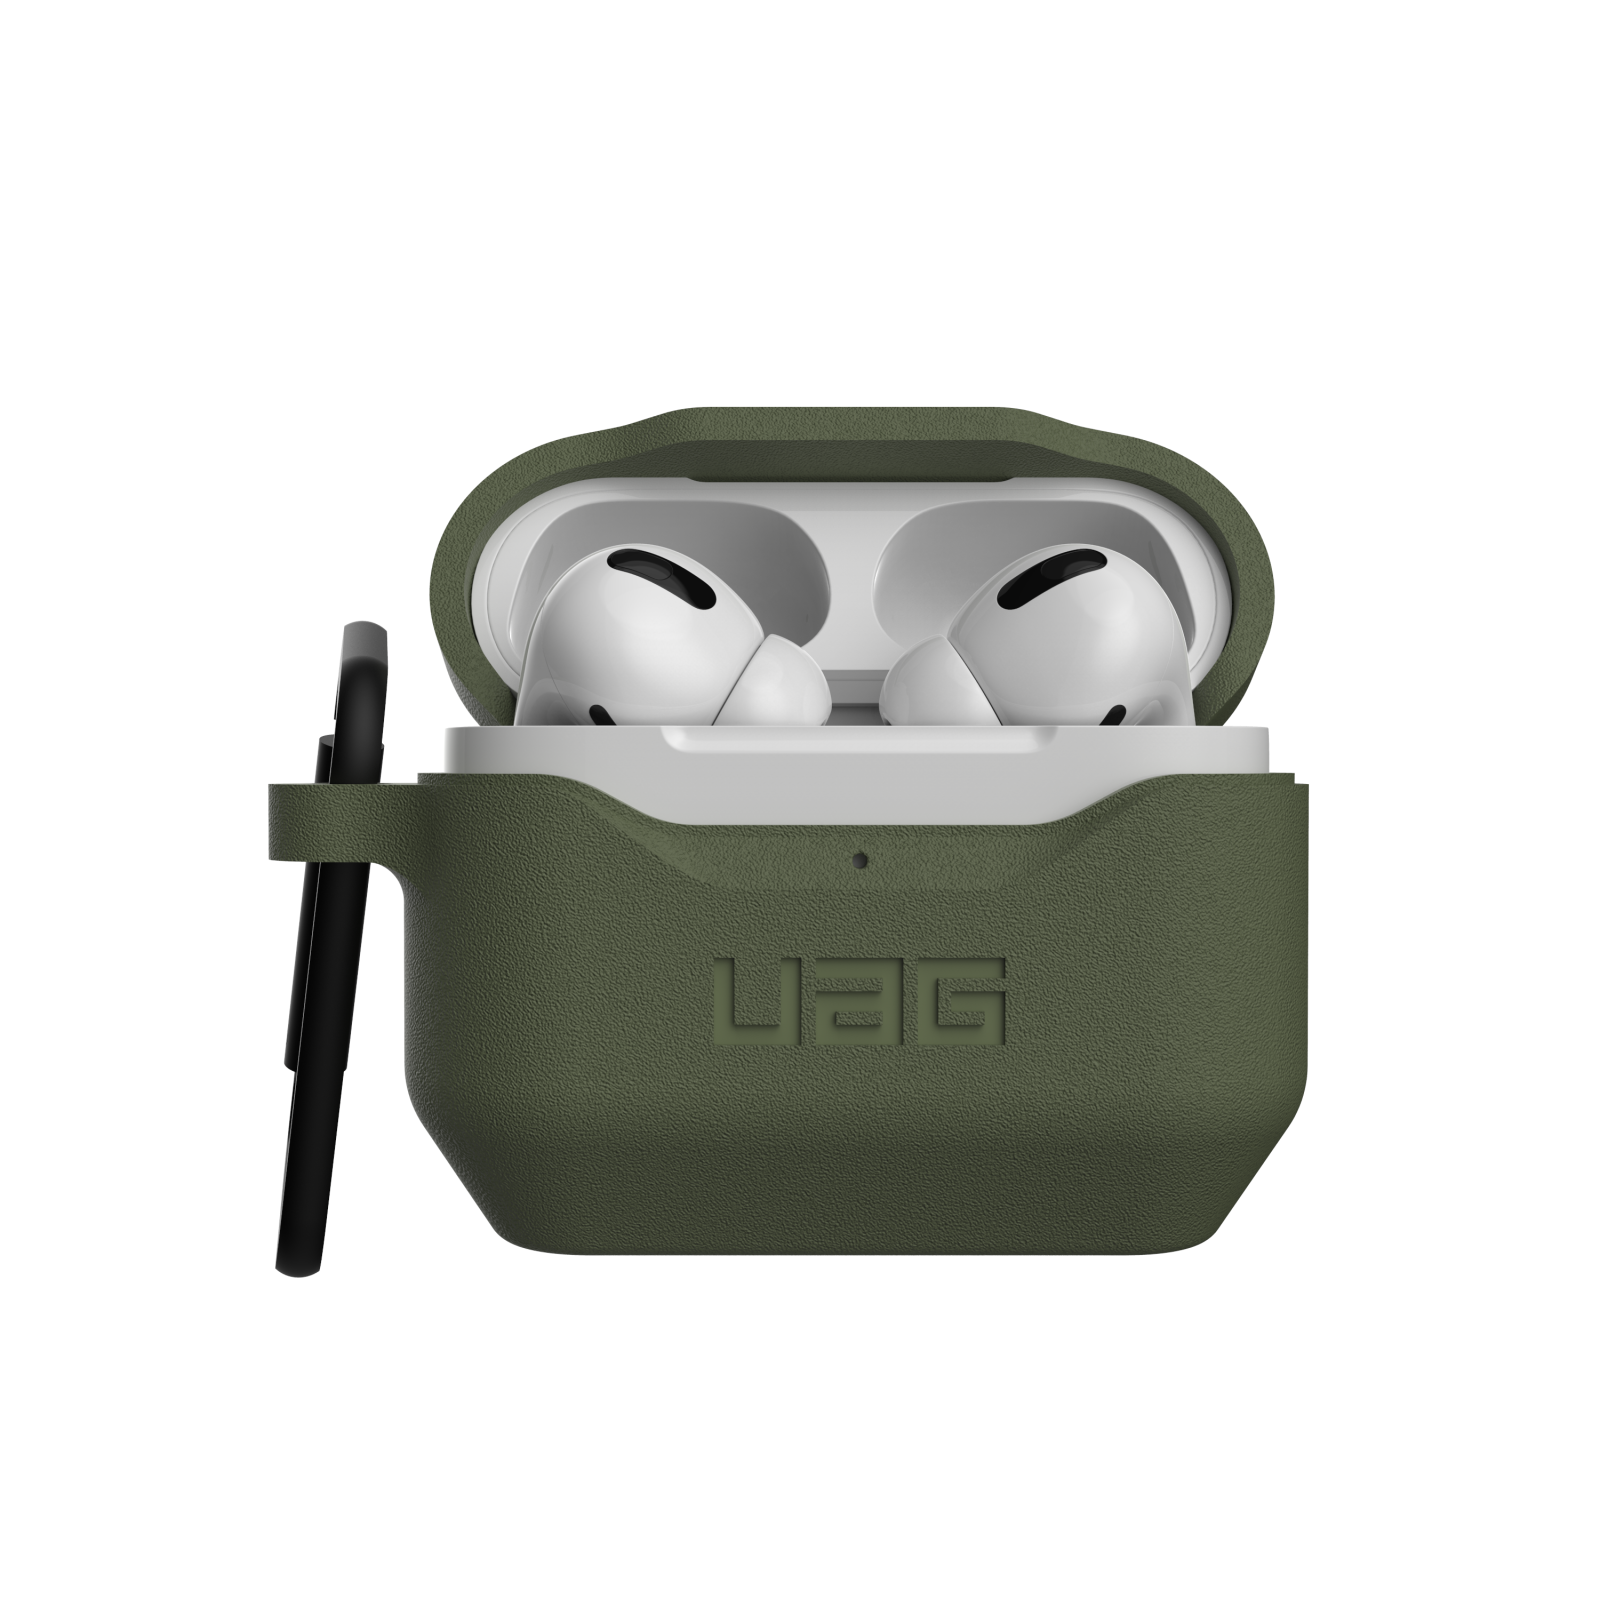  ỐP DẺO UAG SILICON V2 CHO AIRPODS PRO - Olive 